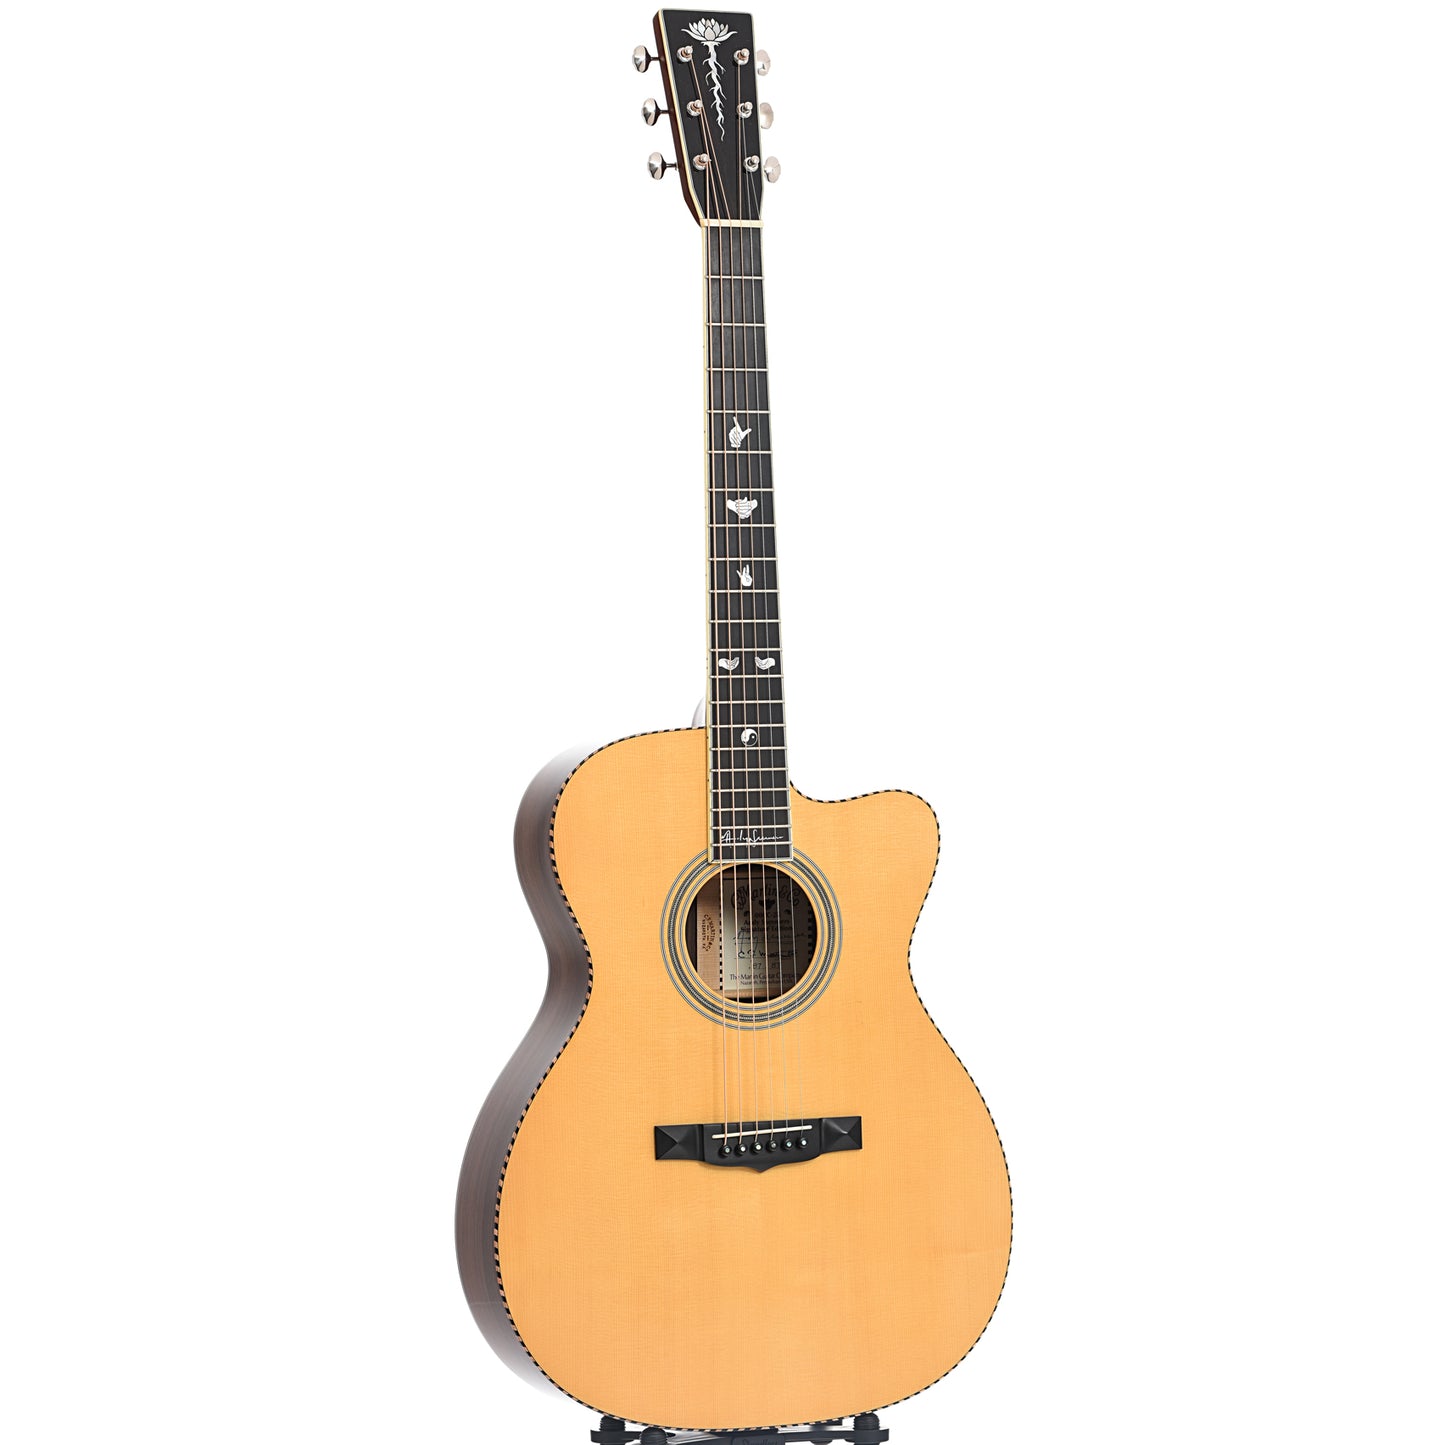 Full front and side of Martin 000C-28 Andy Summers Signature Model Acoustic Guitar (2006)